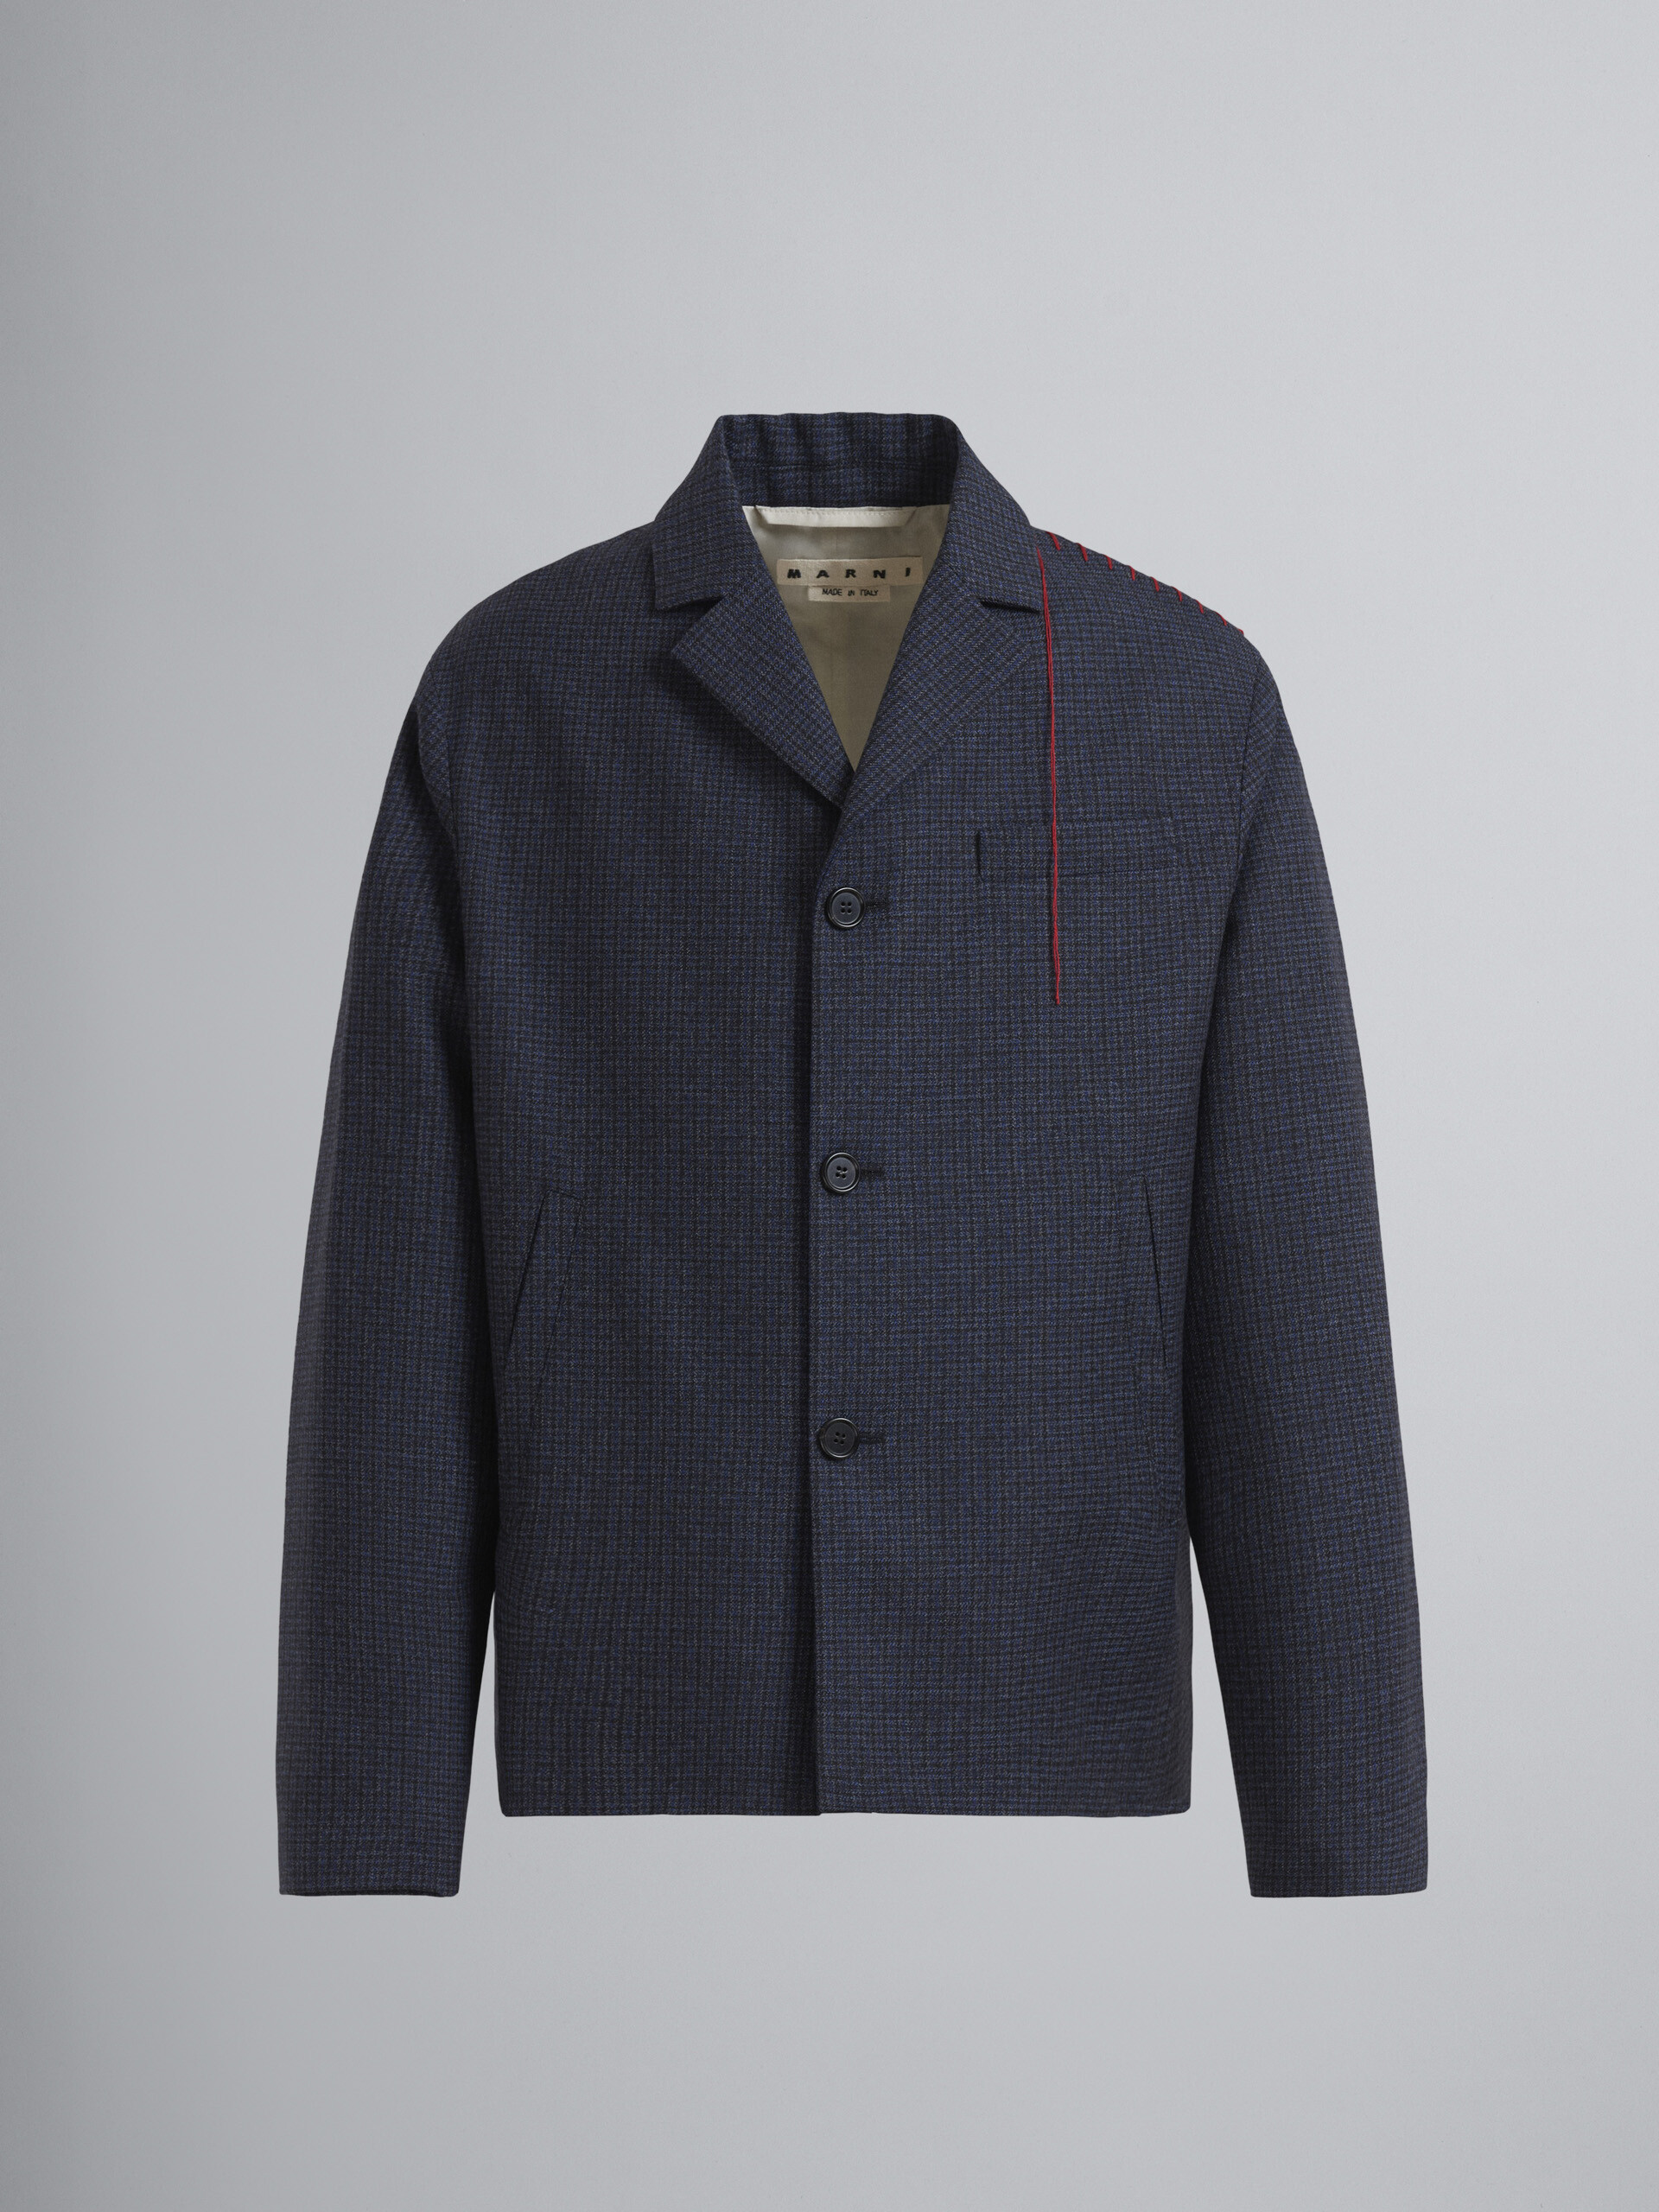 Single-breasted wool jacket with houndstooth check pattern - Jackets - Image 1